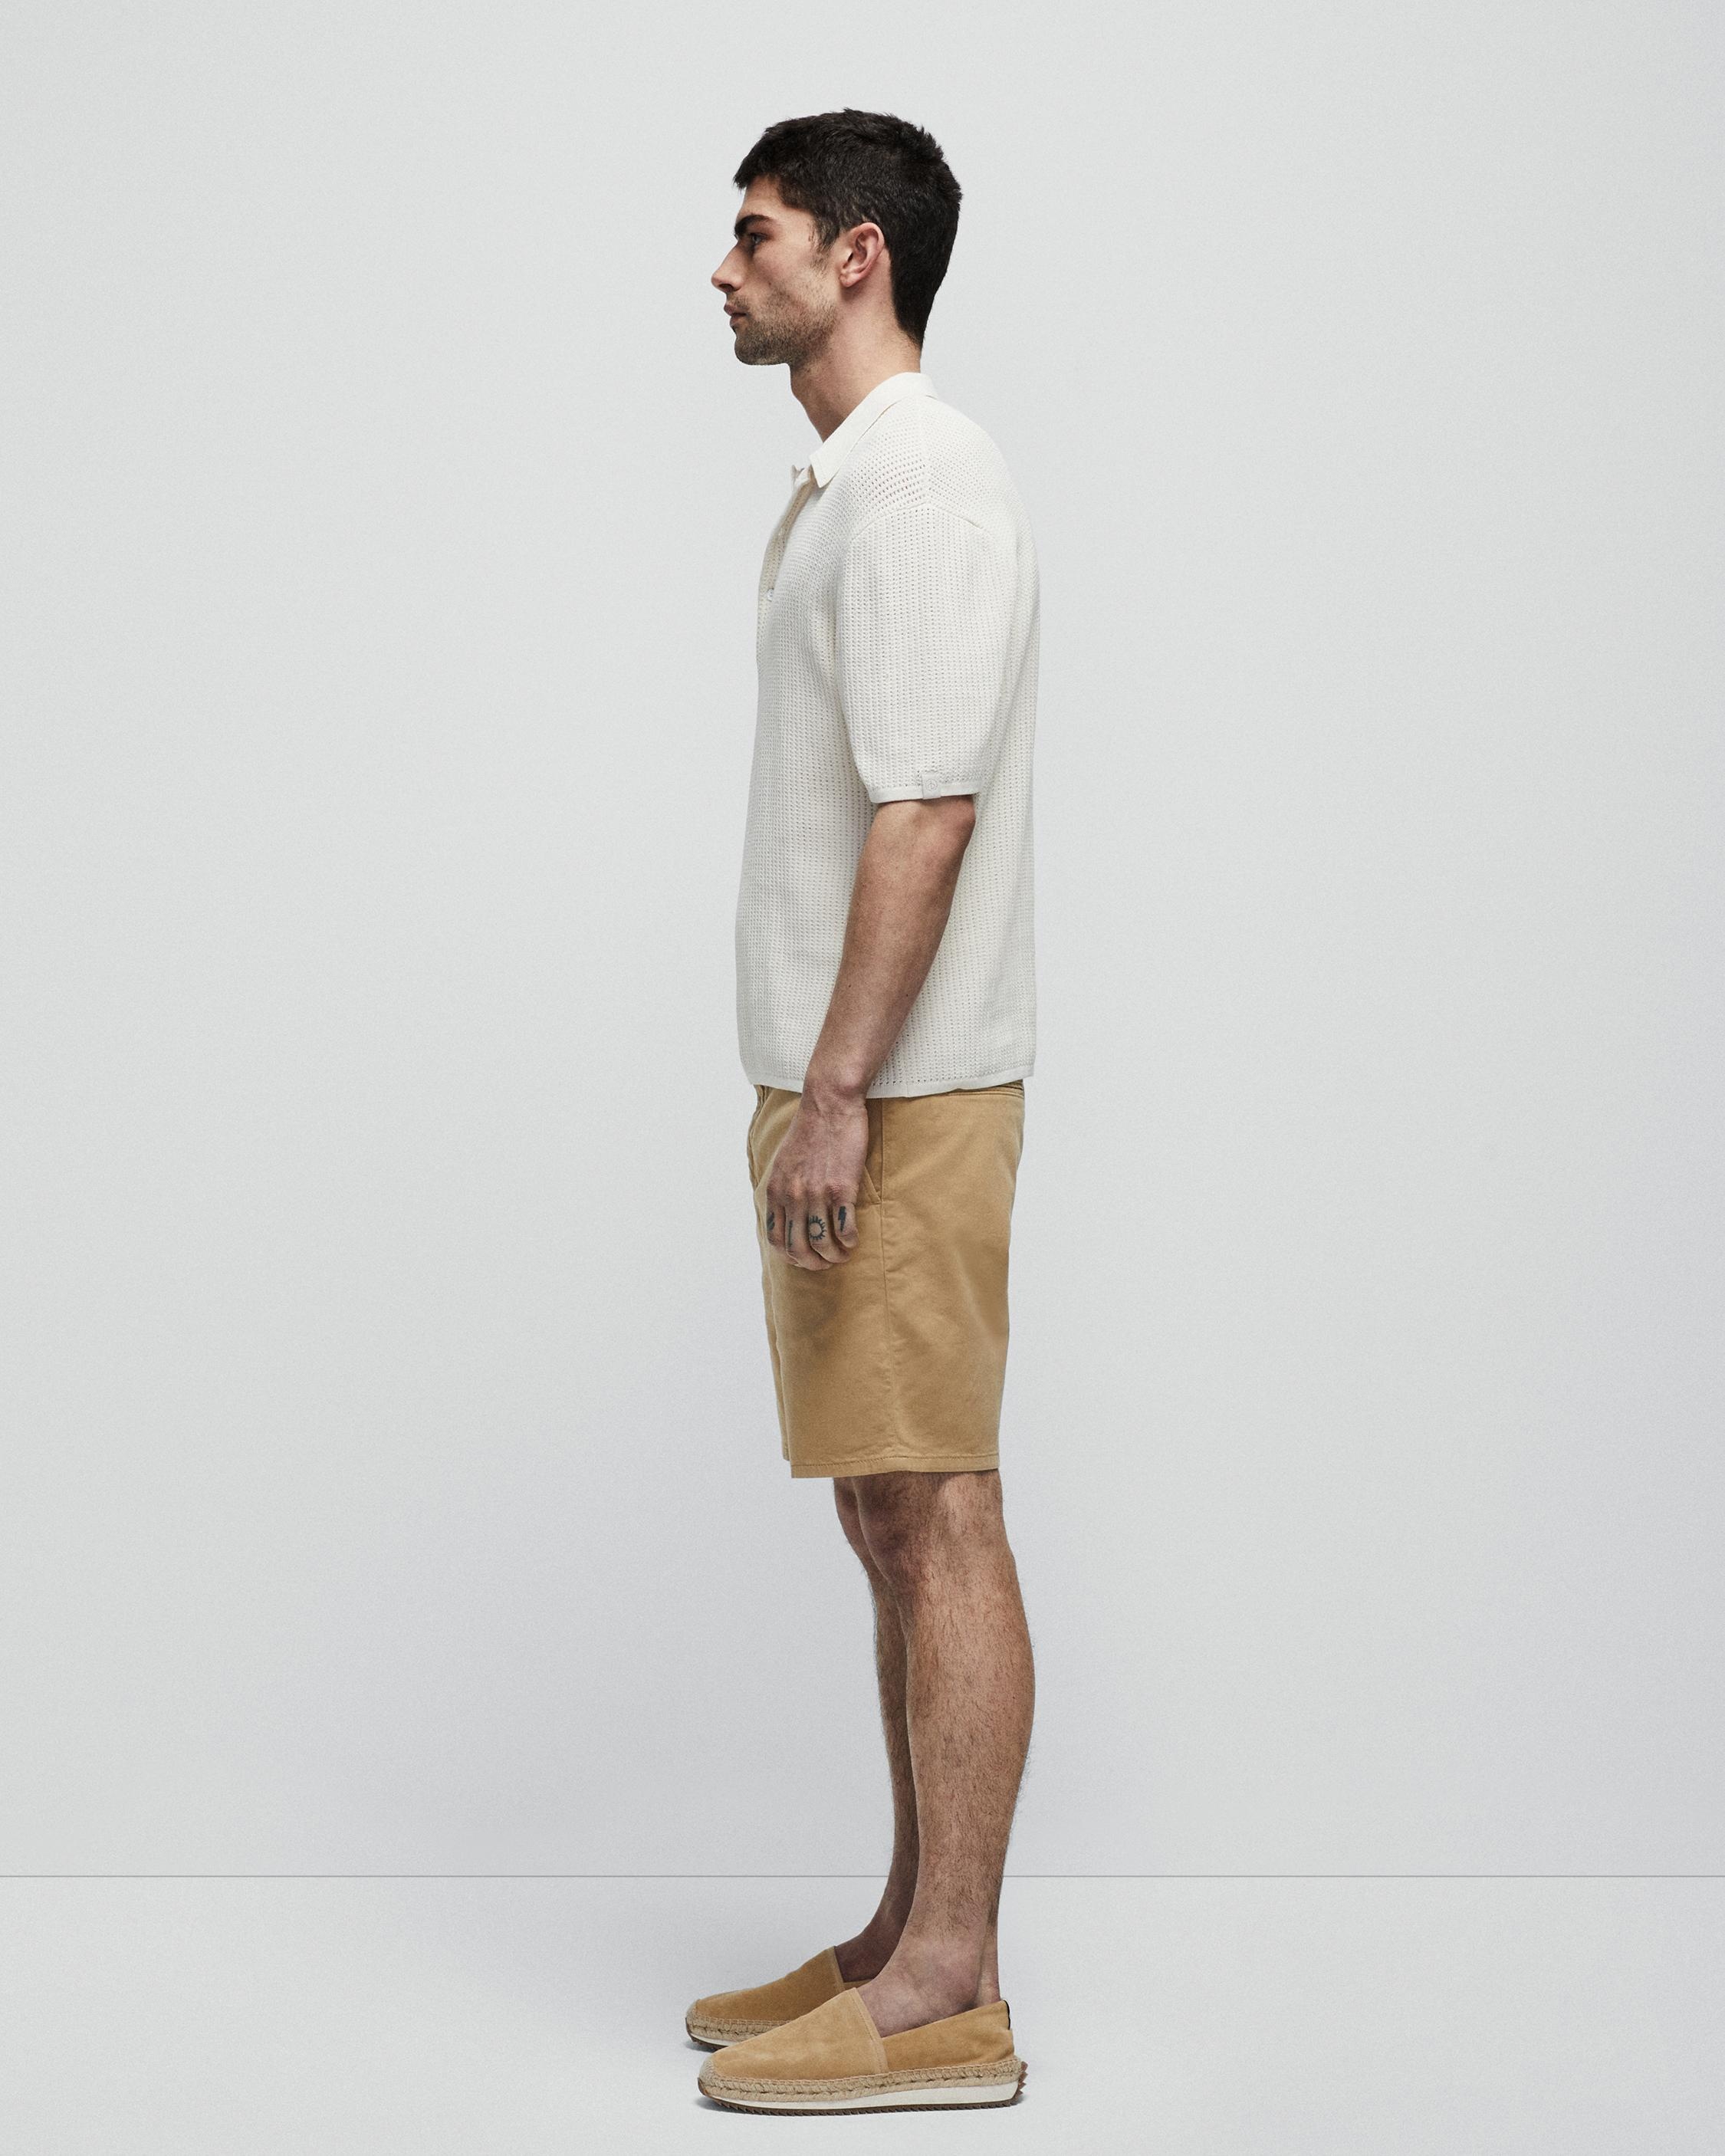 Perry Cotton Stretch Twill Short
Slim Fit Short - 5